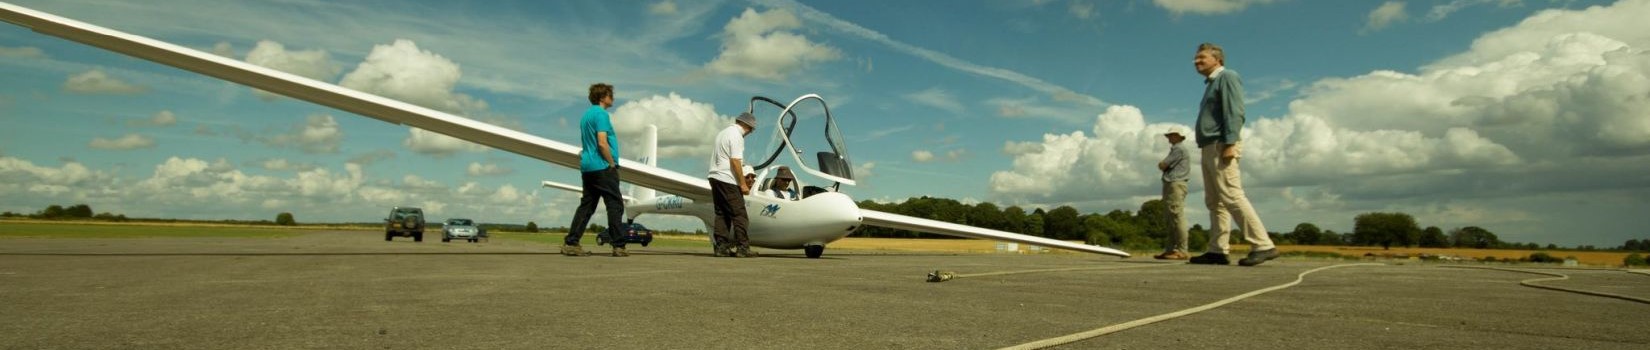 Cotswold Gliding Club